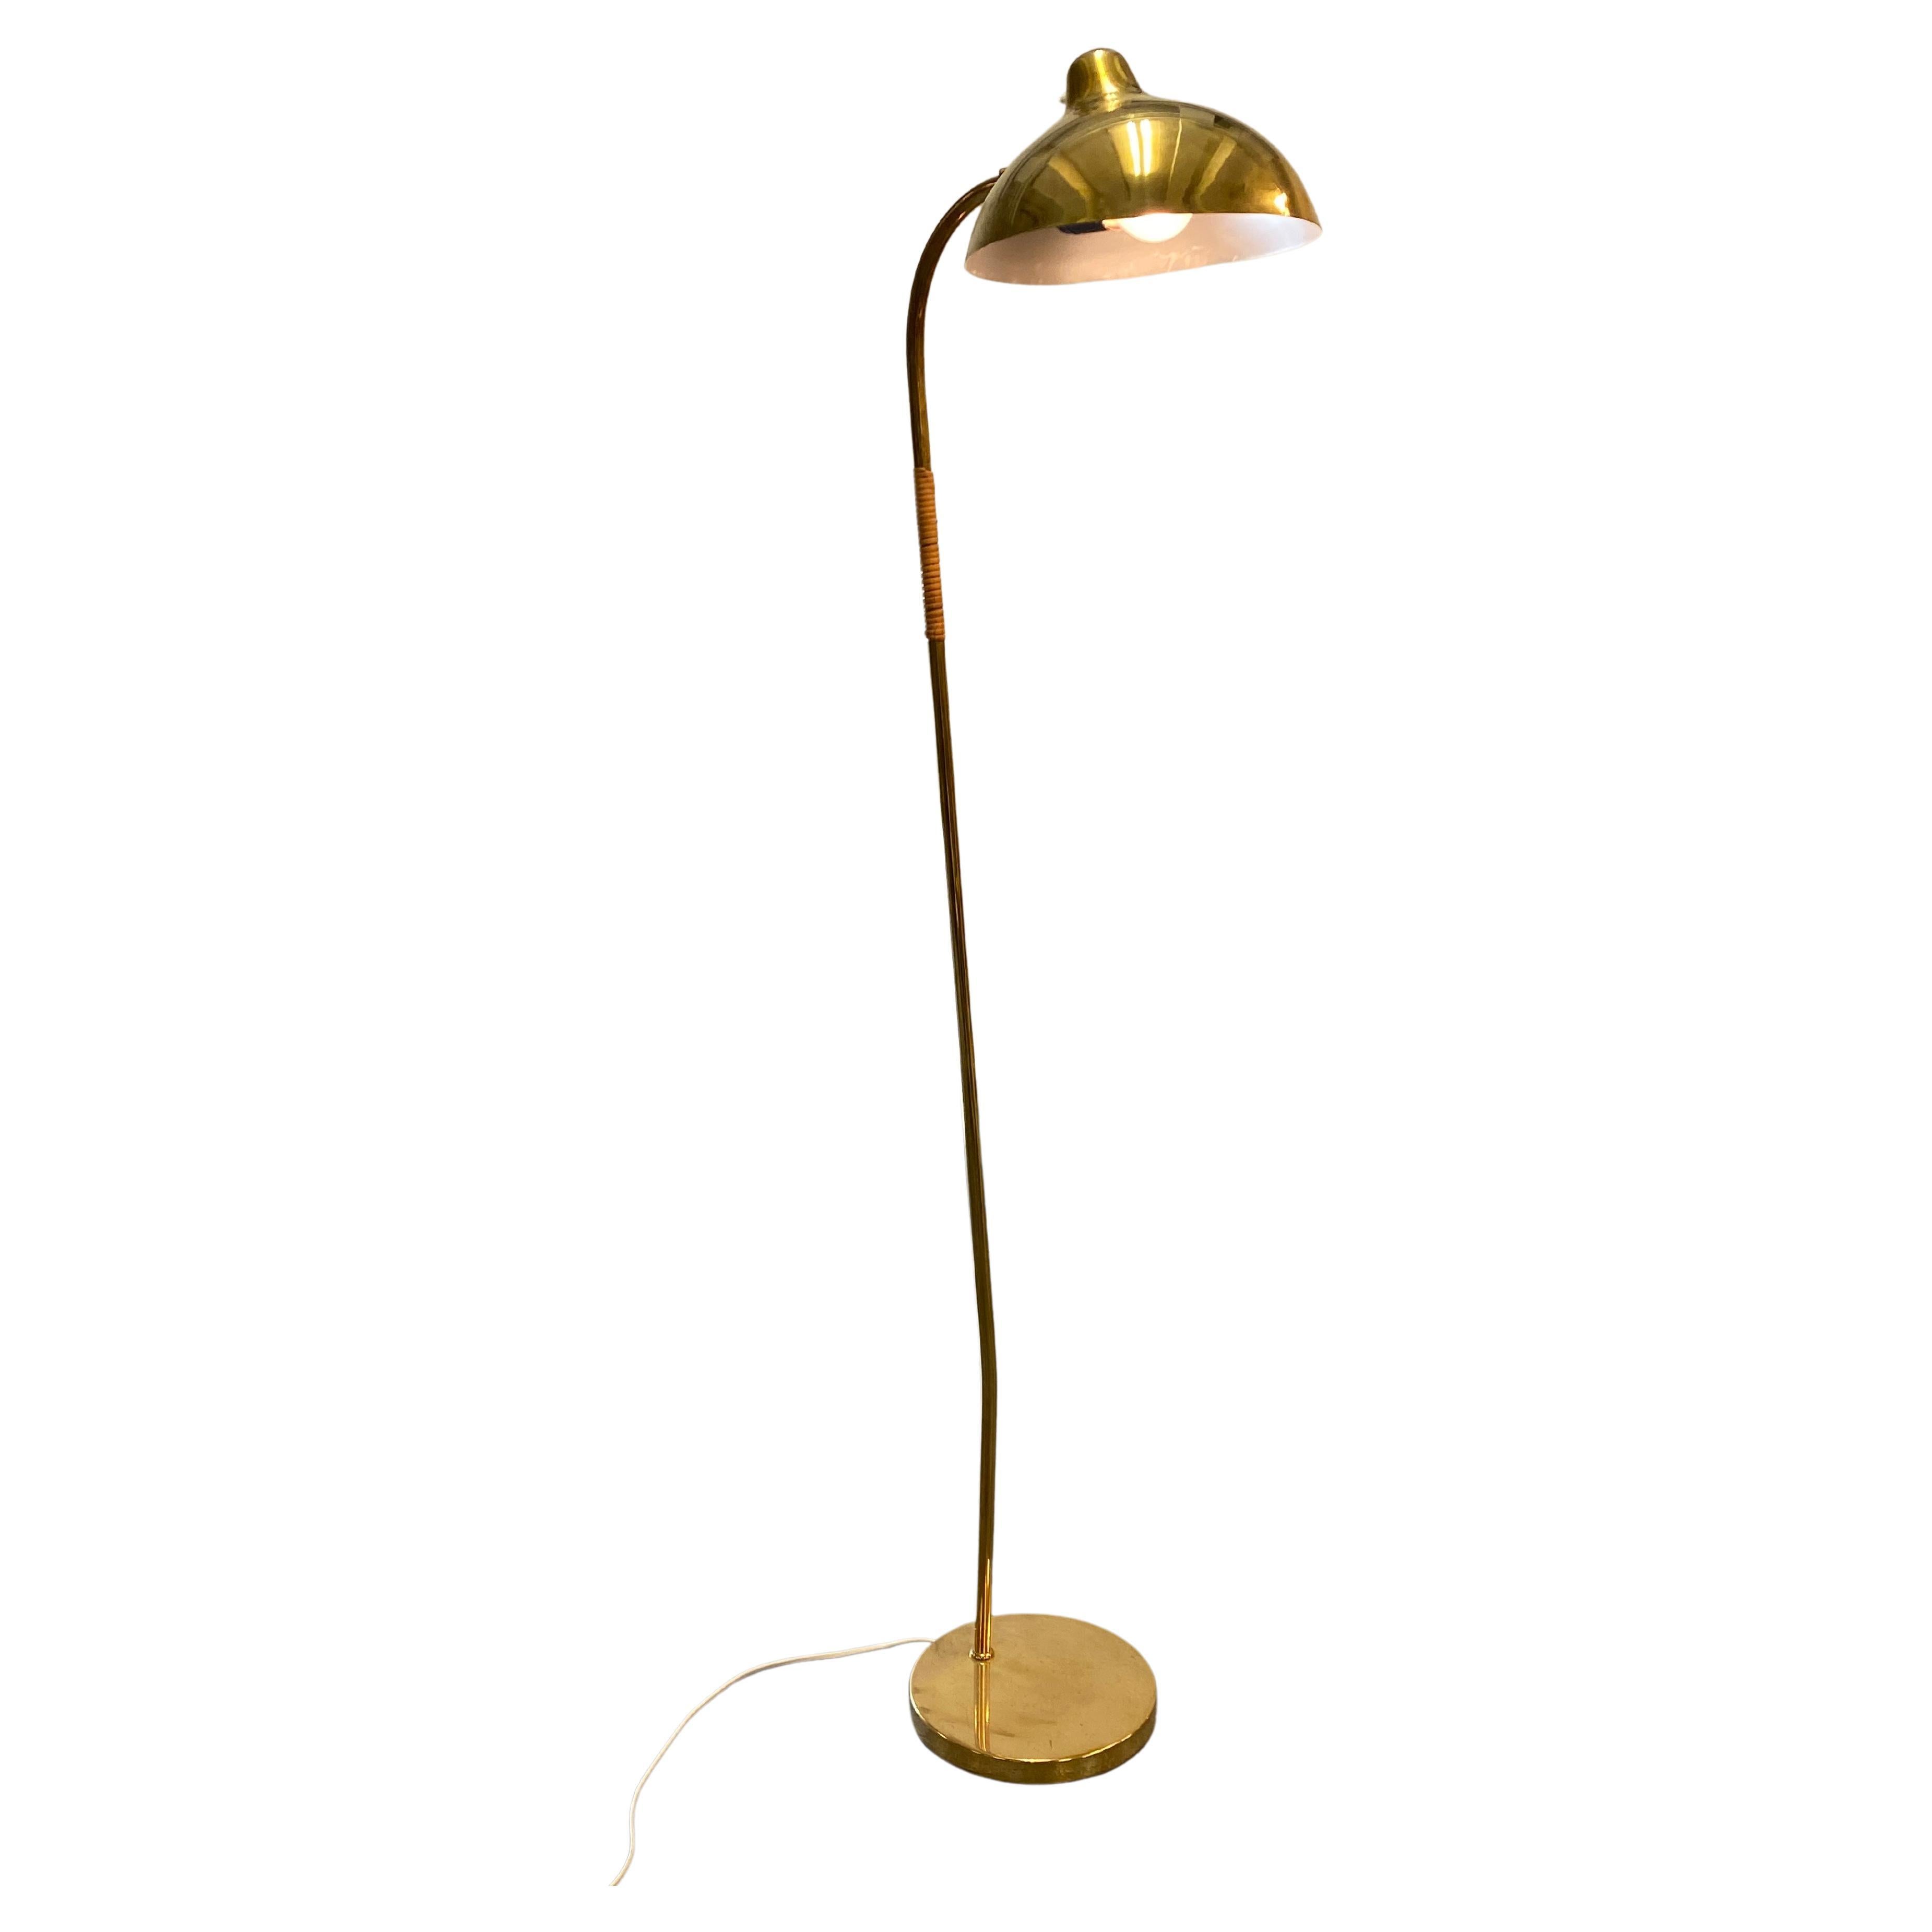 An exceedingly rare and beautiful Floor lamp in full brass (rattan on the stem), designed by Gunnel Nyman herself and manufactured by Idman. This particular lamp is very hard to come by and is infact often mistaken as a Tynell due to very little